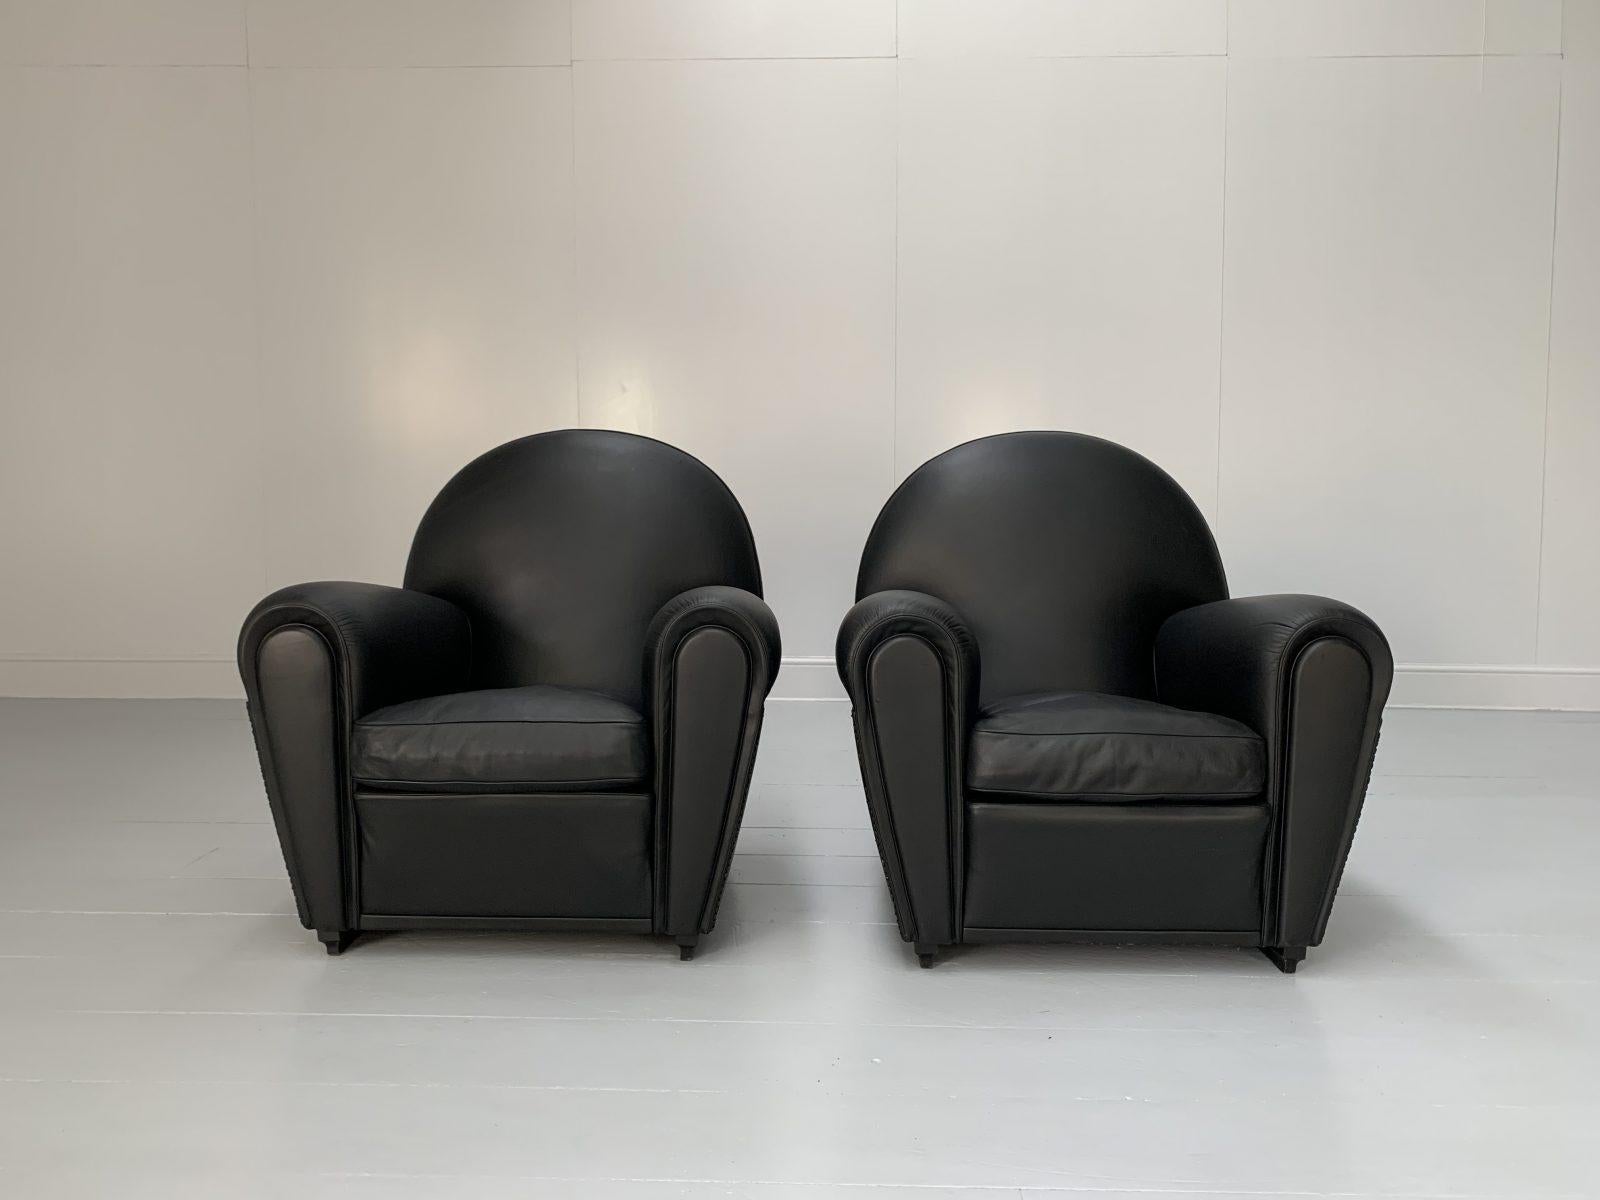 Hello Friends, and welcome to another unmissable offering from Lord Browns Furniture, the UK’s premier resource for fine Sofas and Chairs.

On offer on this occasion is a rare, identical pair of “Vanity Fair” Armchairs from the world renown Italian